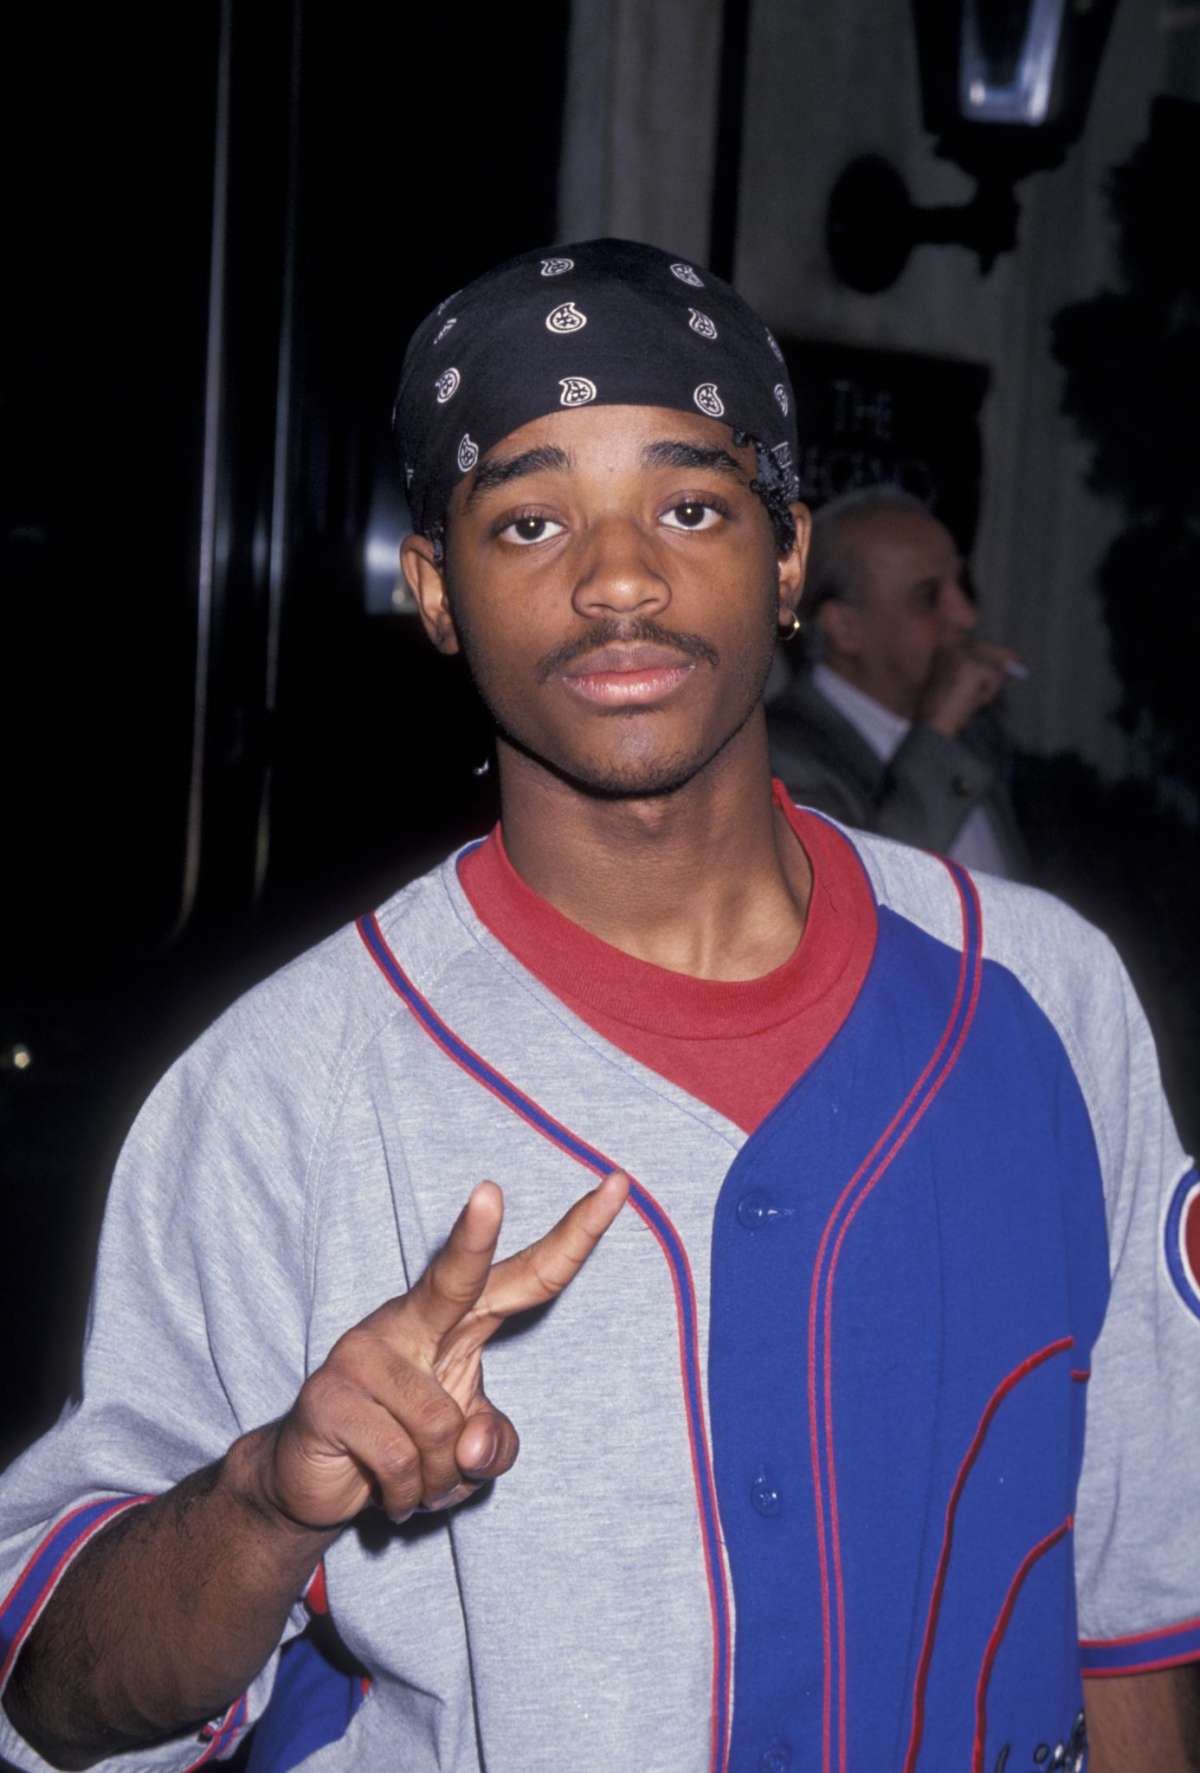 Menace II Society cast: Where are they now?